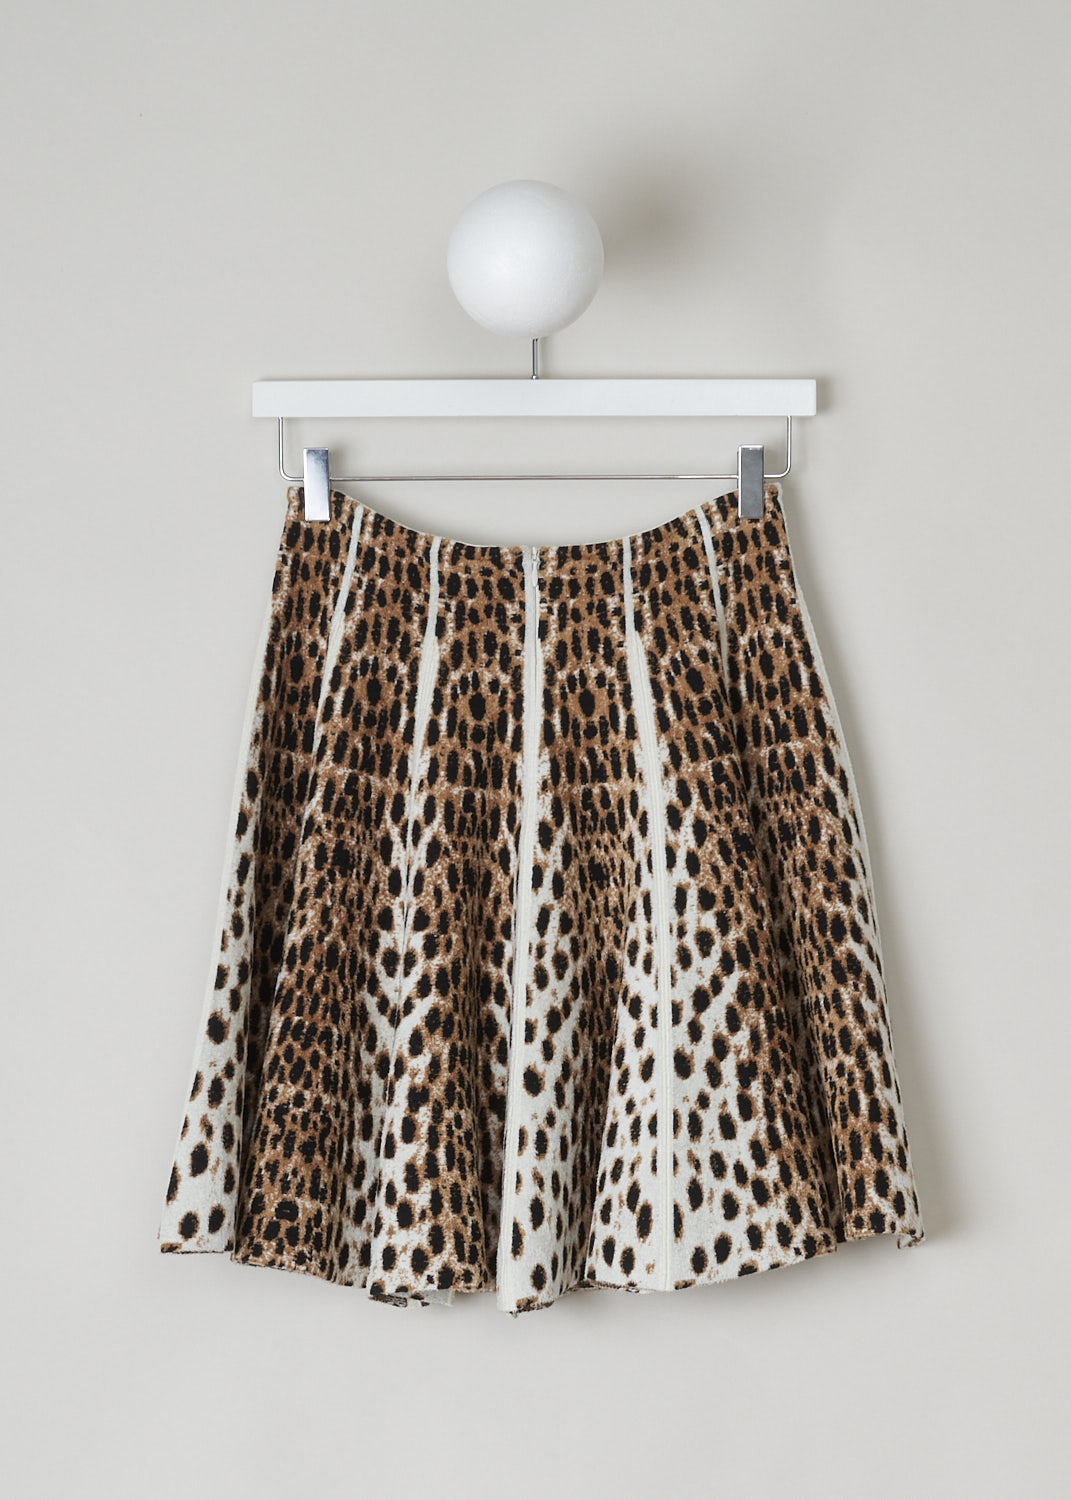 ALAÏA, LEOPARD-PRINT PLEATED BELL SKIRT, 8H9JD95CM435_JUPE_GUEPARD, Beige, Print, Back, This short pleated leopard-print skirt has a paneled look. A concealed zipper in the back functions as the closure option. 
